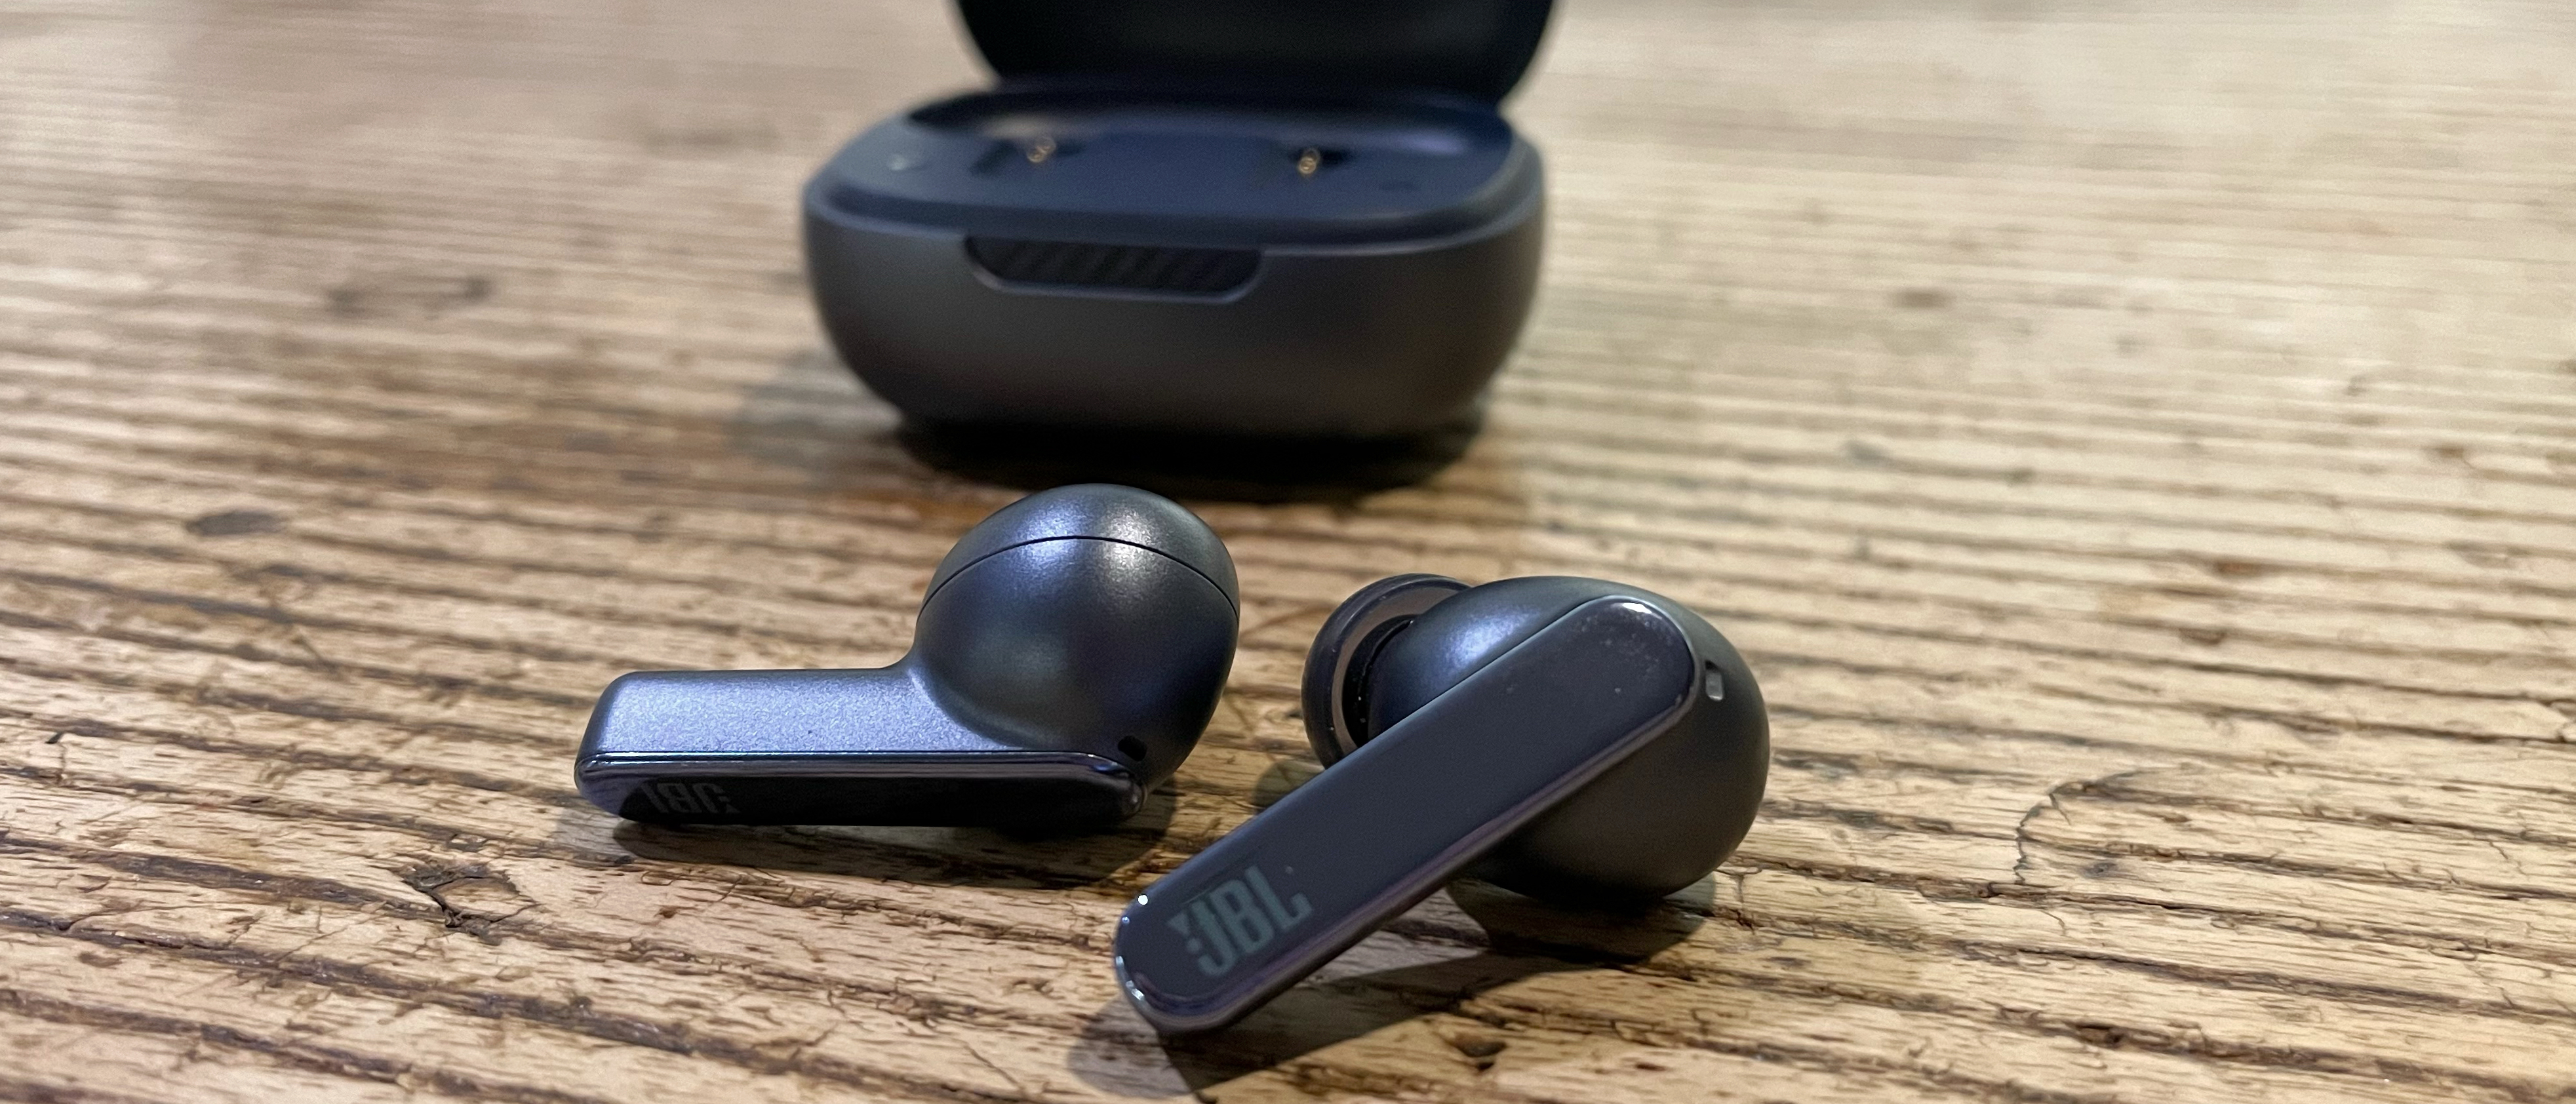 JBL Live Pro 2 review: the cheap noise-cancelling earbuds you've